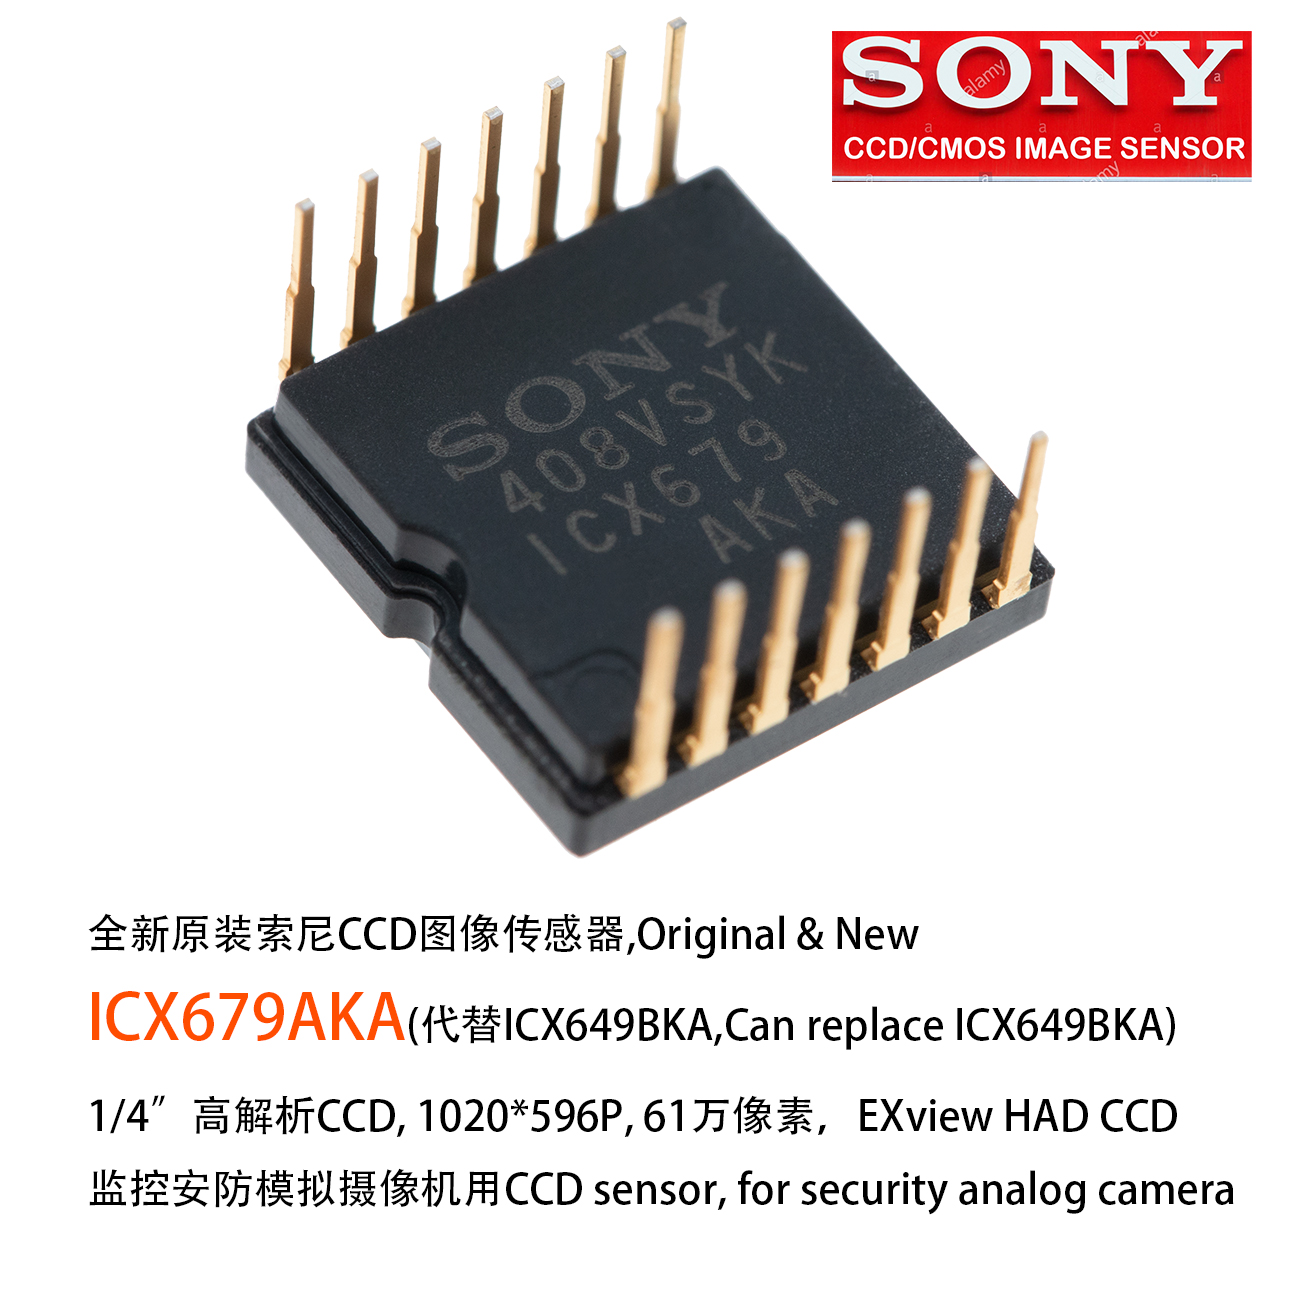 ICX679AKA，SNOY 1/4 CCD Image Sensor，for PAL Color security Video Cameras CCD sensor，610KP analog CCD  image sensor，SONY WDR CCD,SONY Super HAD CCD, SONY WDR CCD SENSOR，SONY high resolution 600Kpixel CCD, security camera color CCD image sensor, can replace ICX649BKA, upgrade of ICX649BKA products,